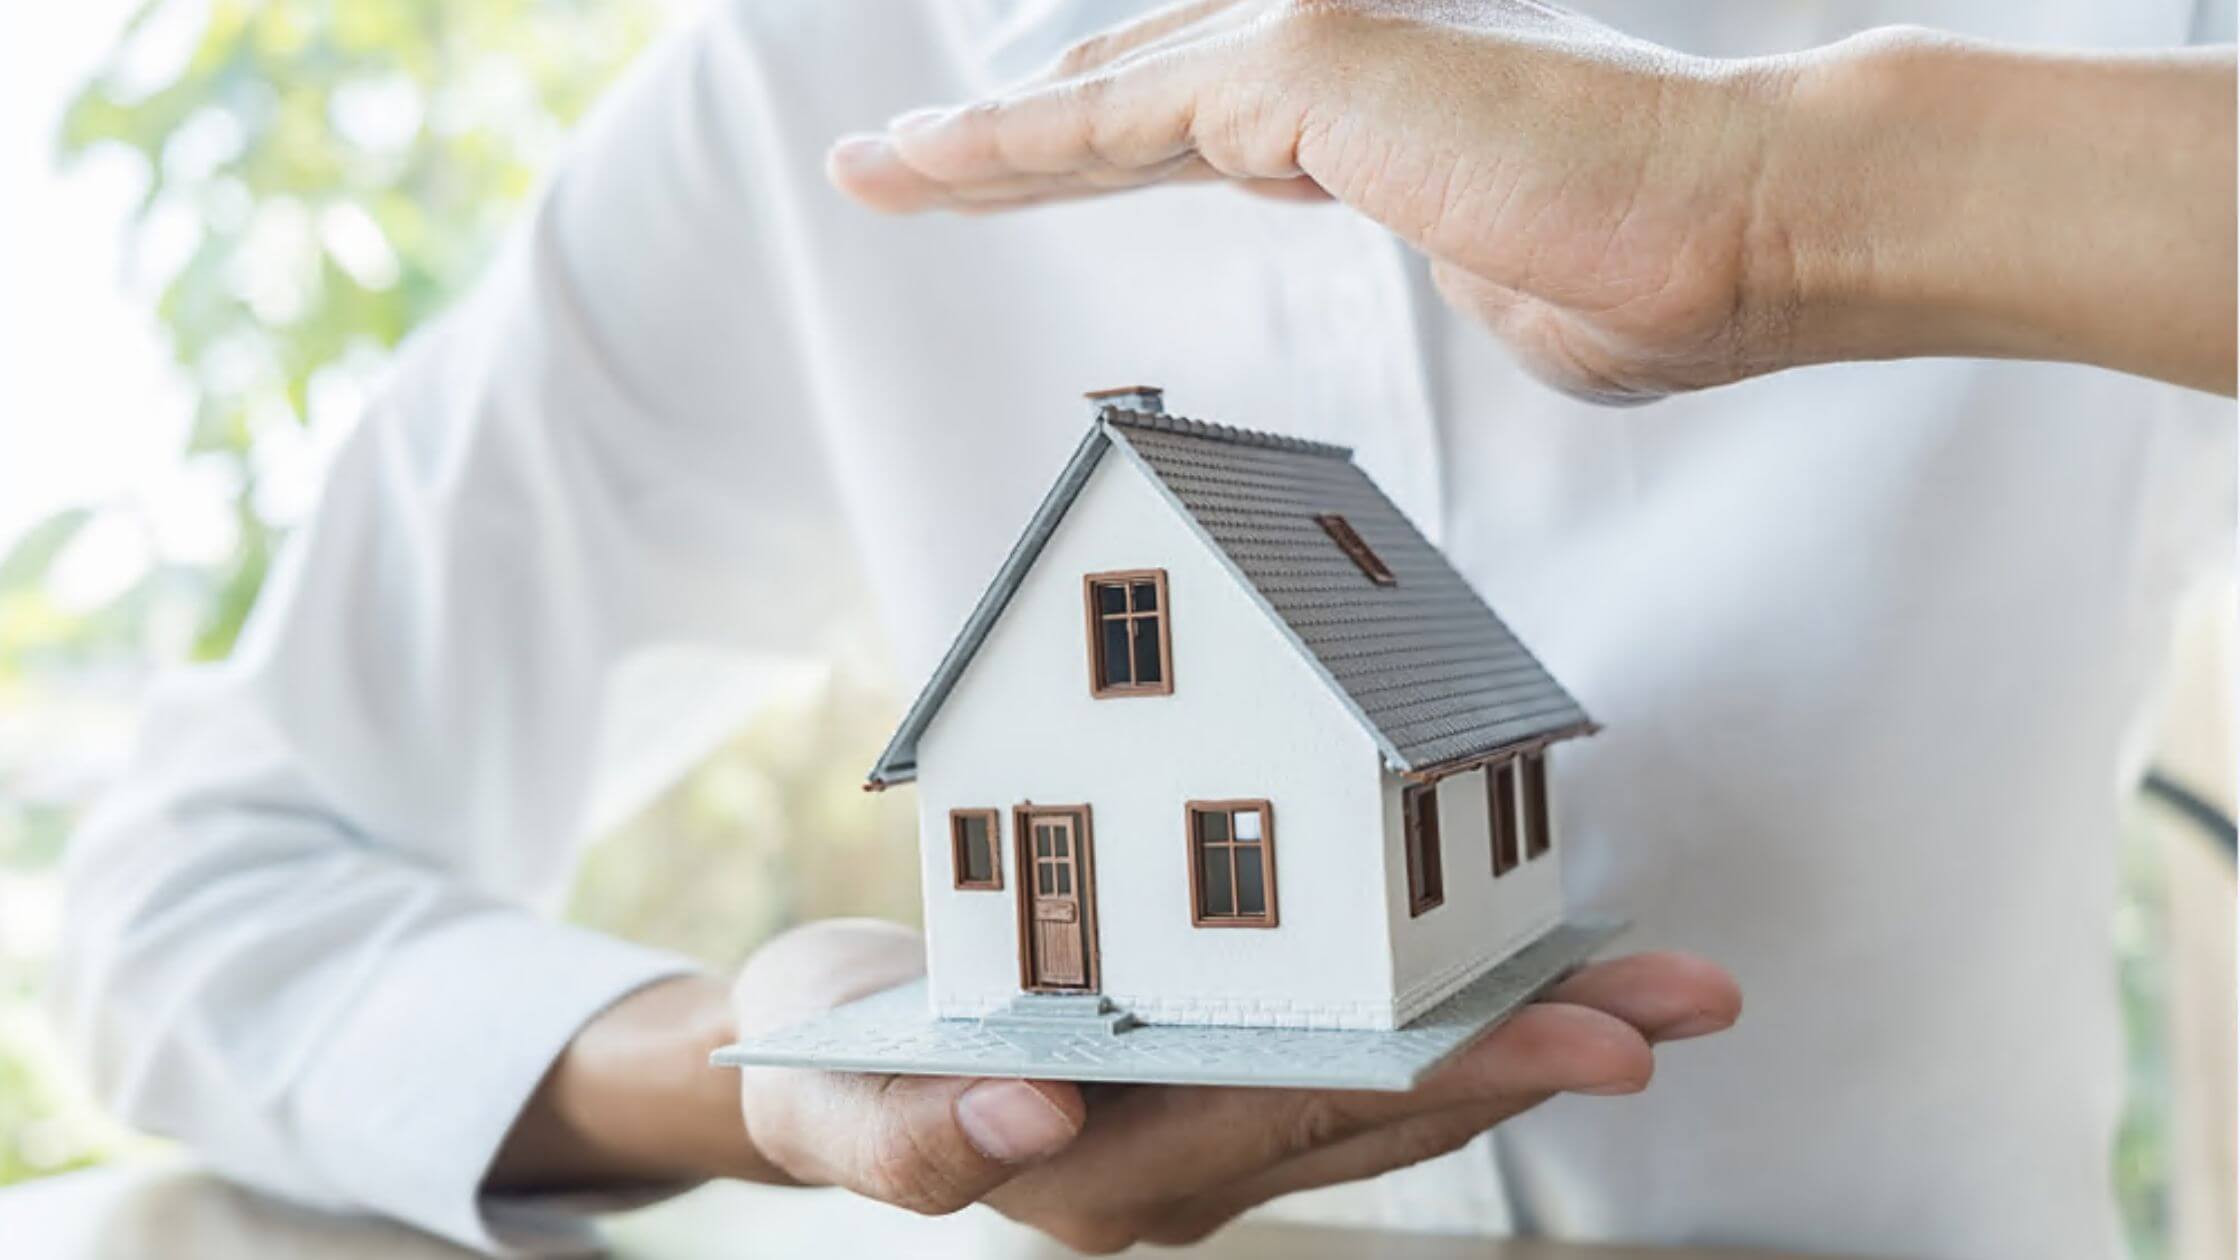 Building Insurance Vs. Home Insurance: How Are They Different